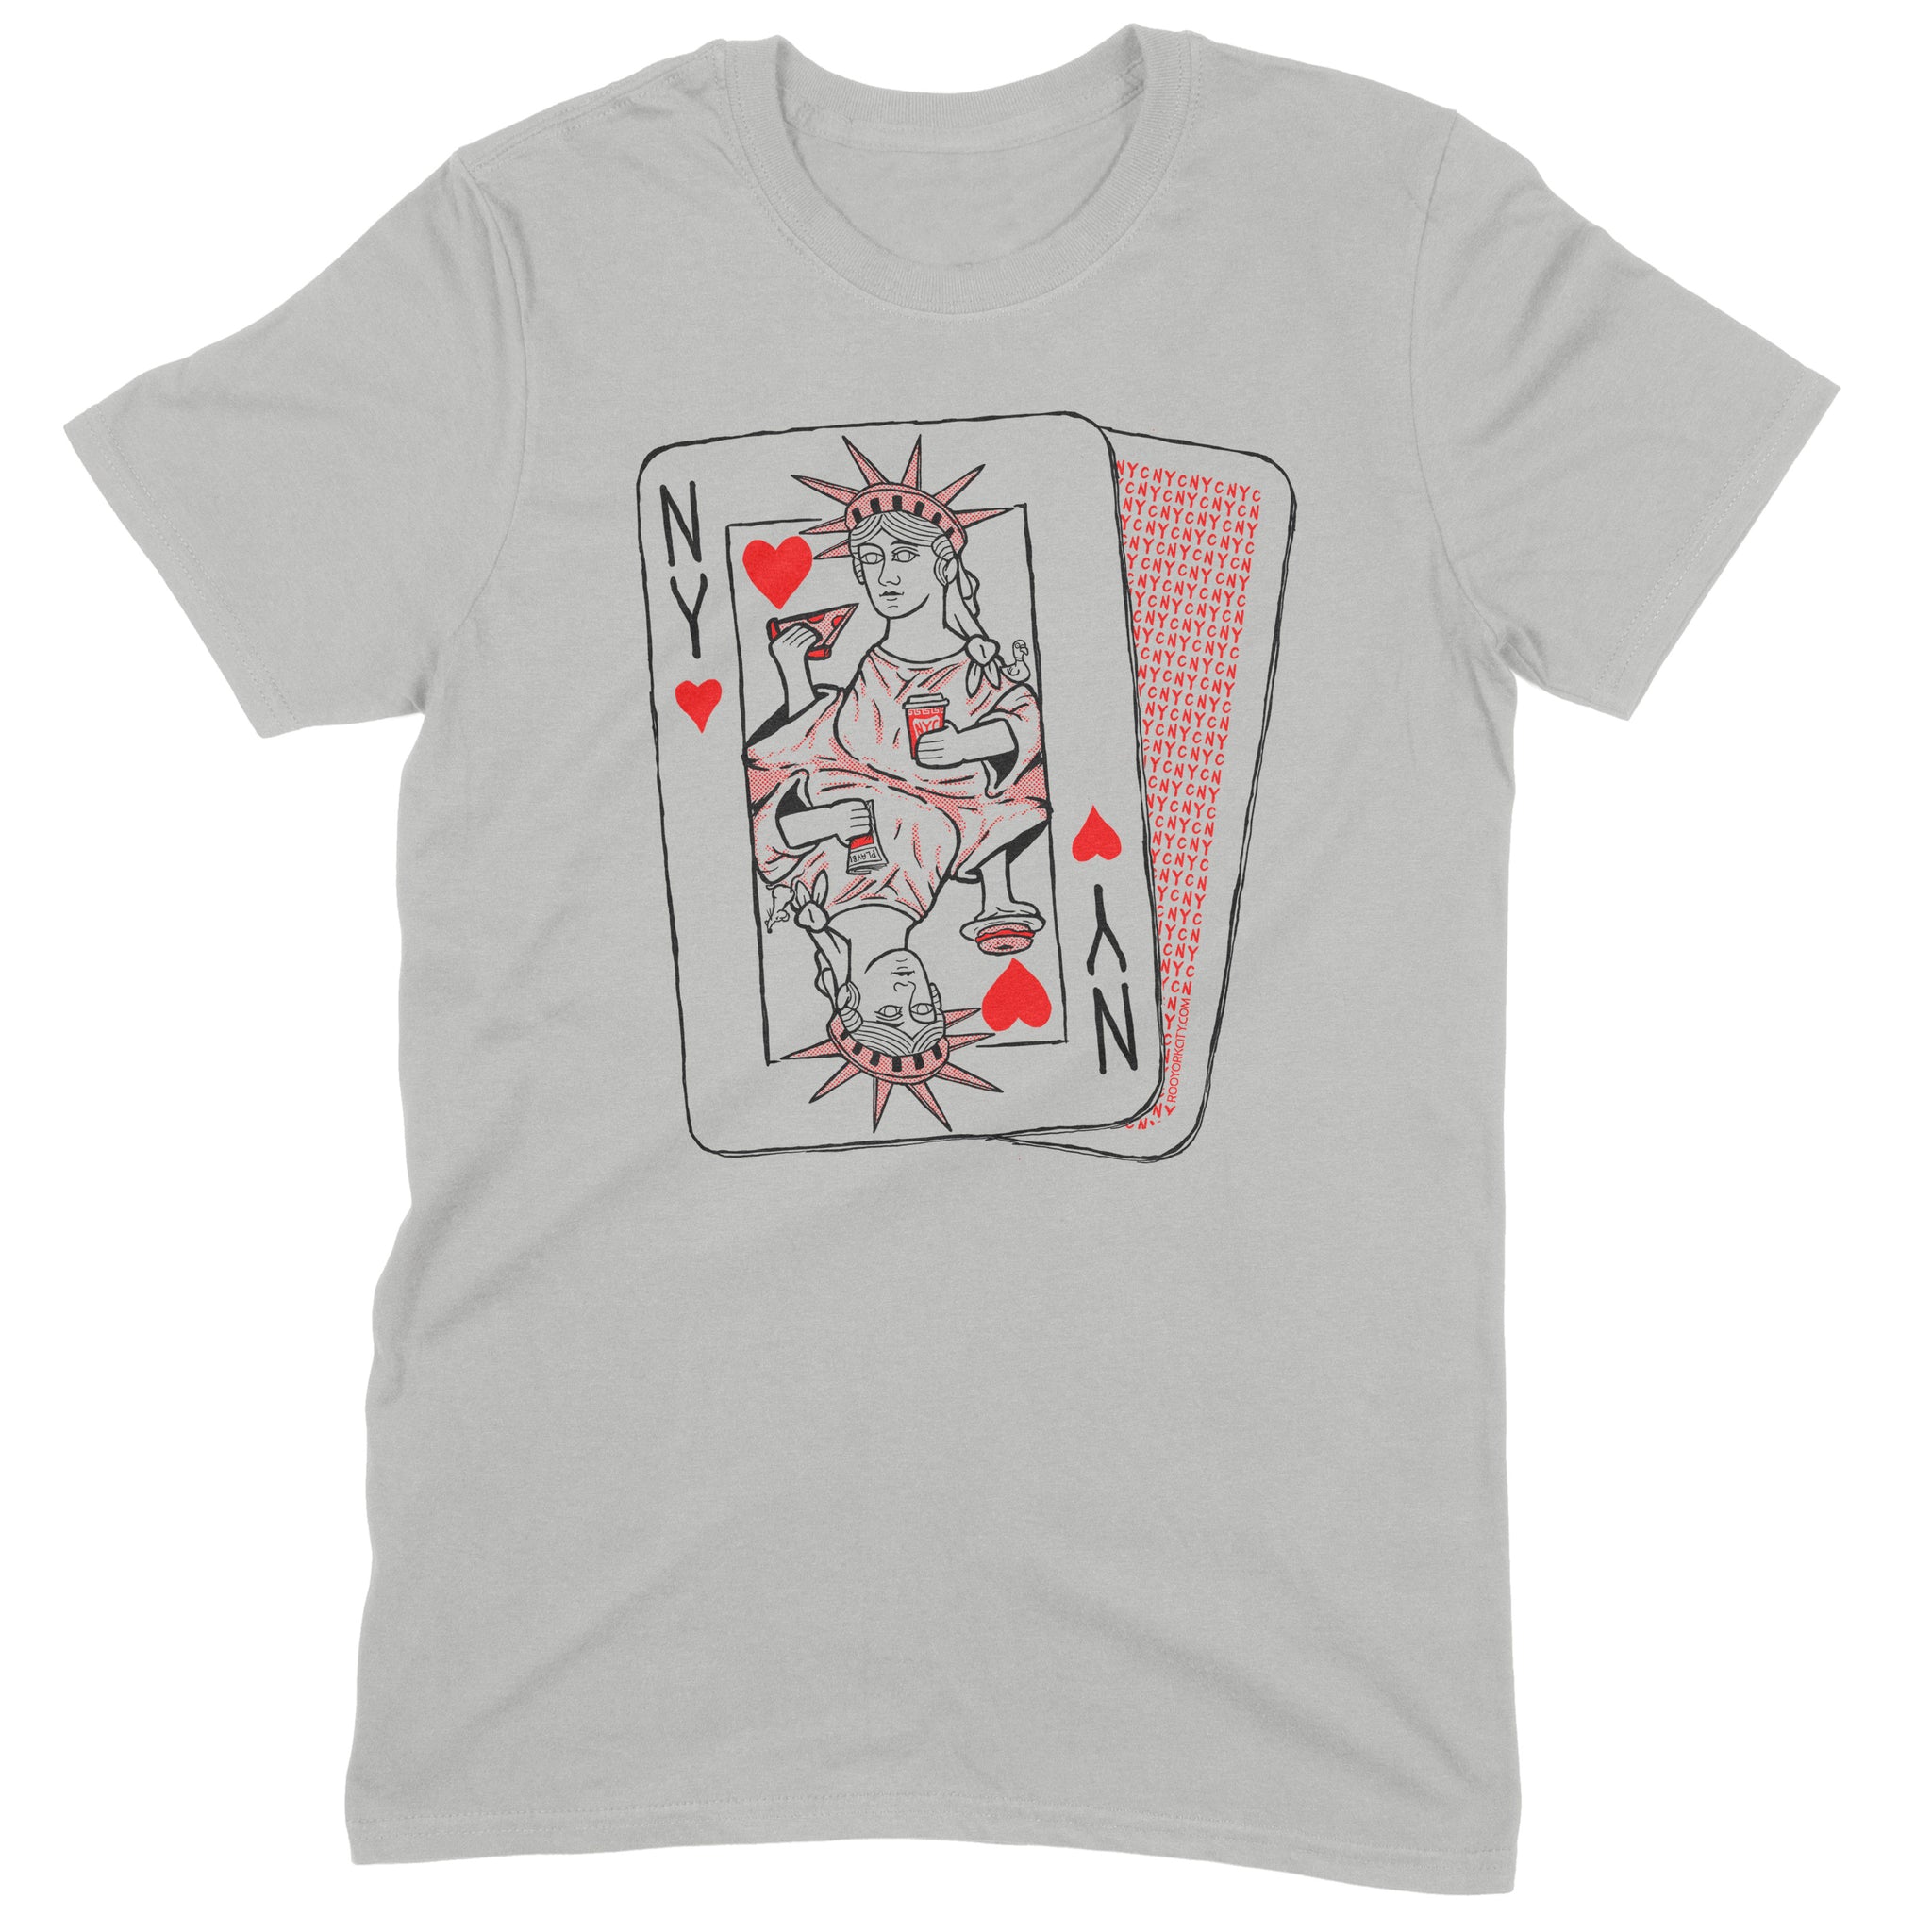 NYC Statue of Liberty Queen of Hearts Shirt (Hand Drawn // Hand Printed)